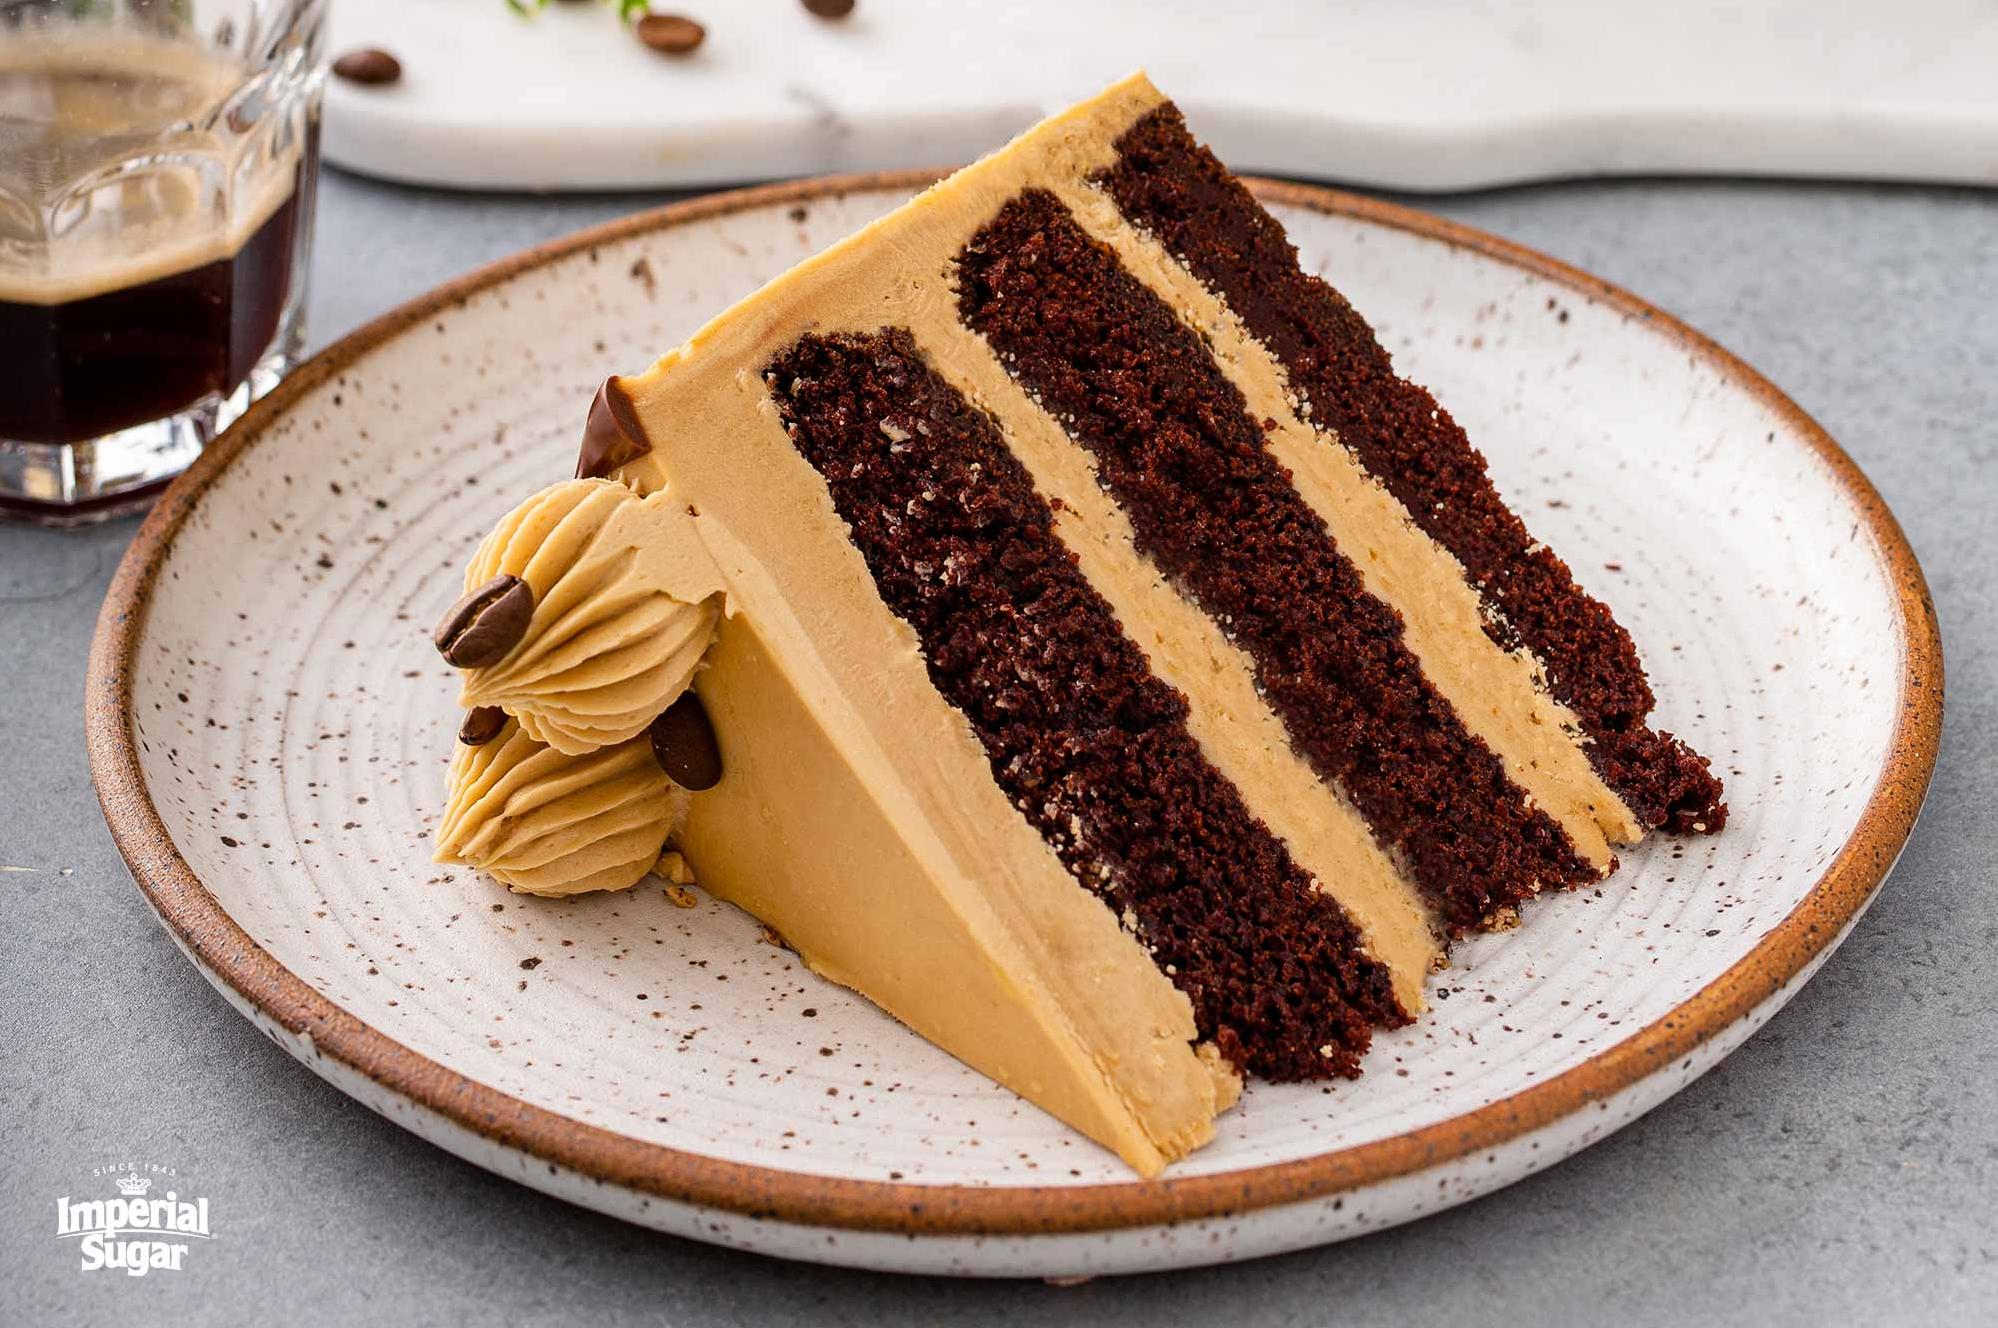  Layers upon layers of rich chocolate cake and espresso buttercream